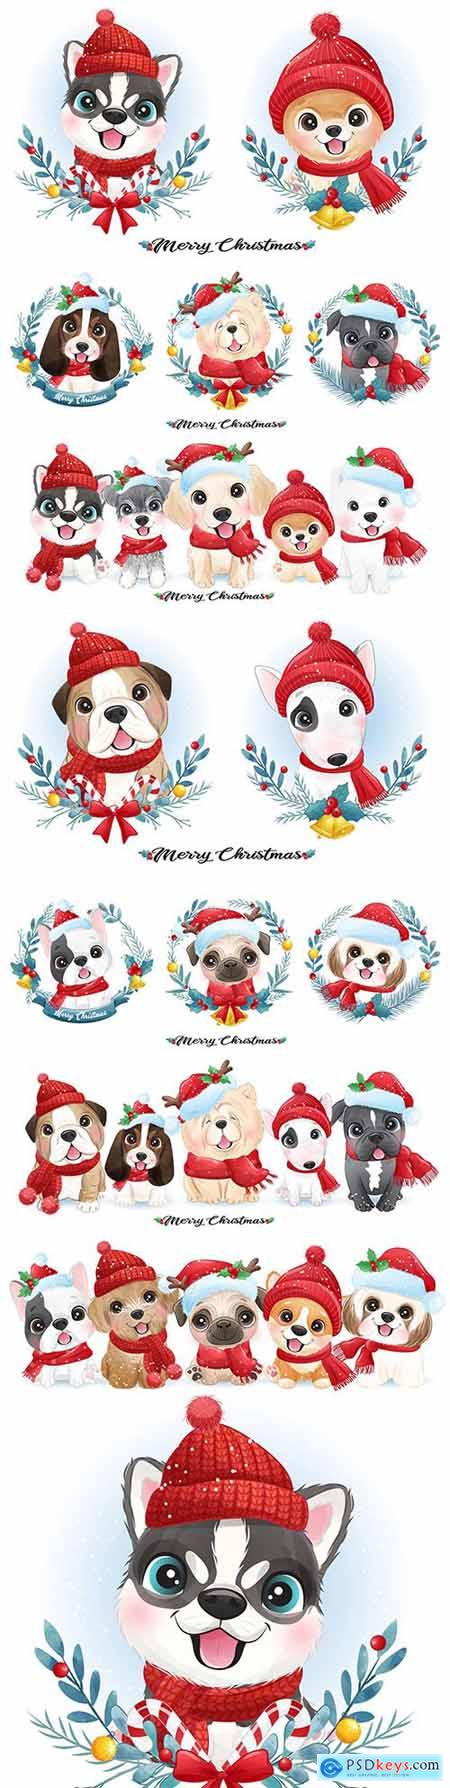 Cute puppy Christmas with watercolor illustration